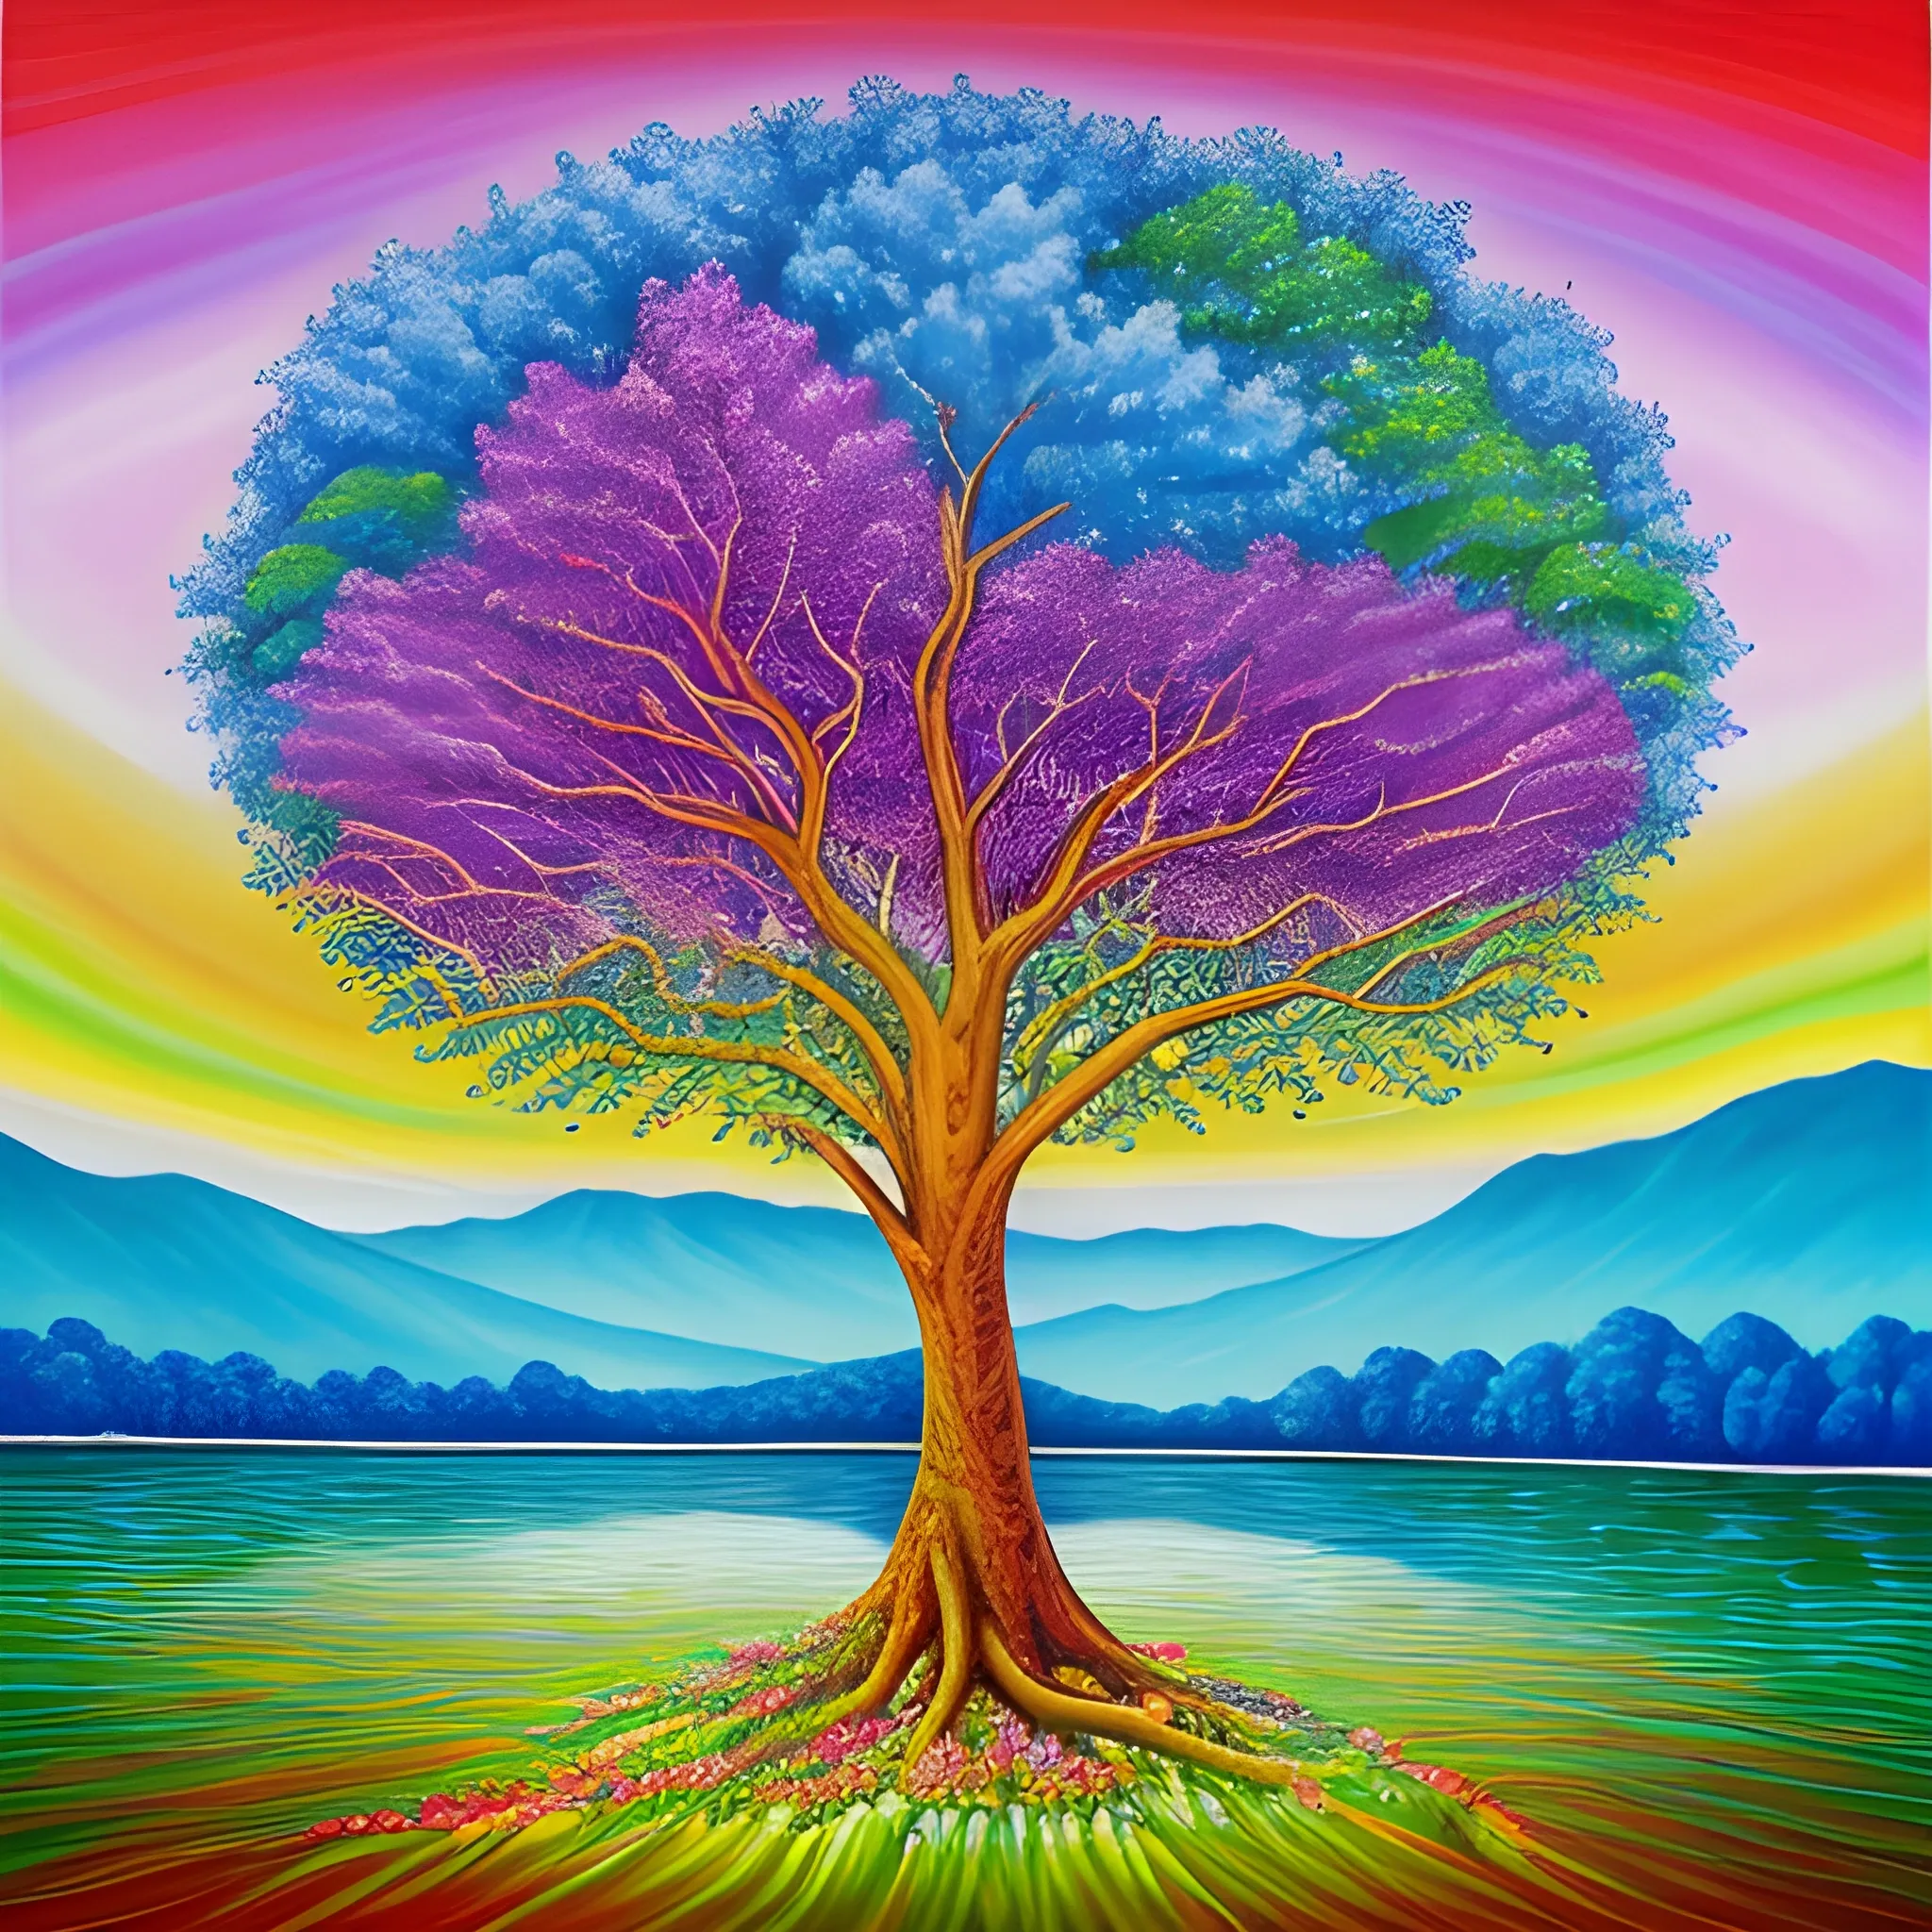  A vibrant painting showcasing the monthly-bearing fruit and healing properties of the trees of life on either side of the river. The artwork conveys the abundance and eternal blessings that await the nations in the new heaven and earth. -ar 1:1 -s 1000 -q 3, Trippy